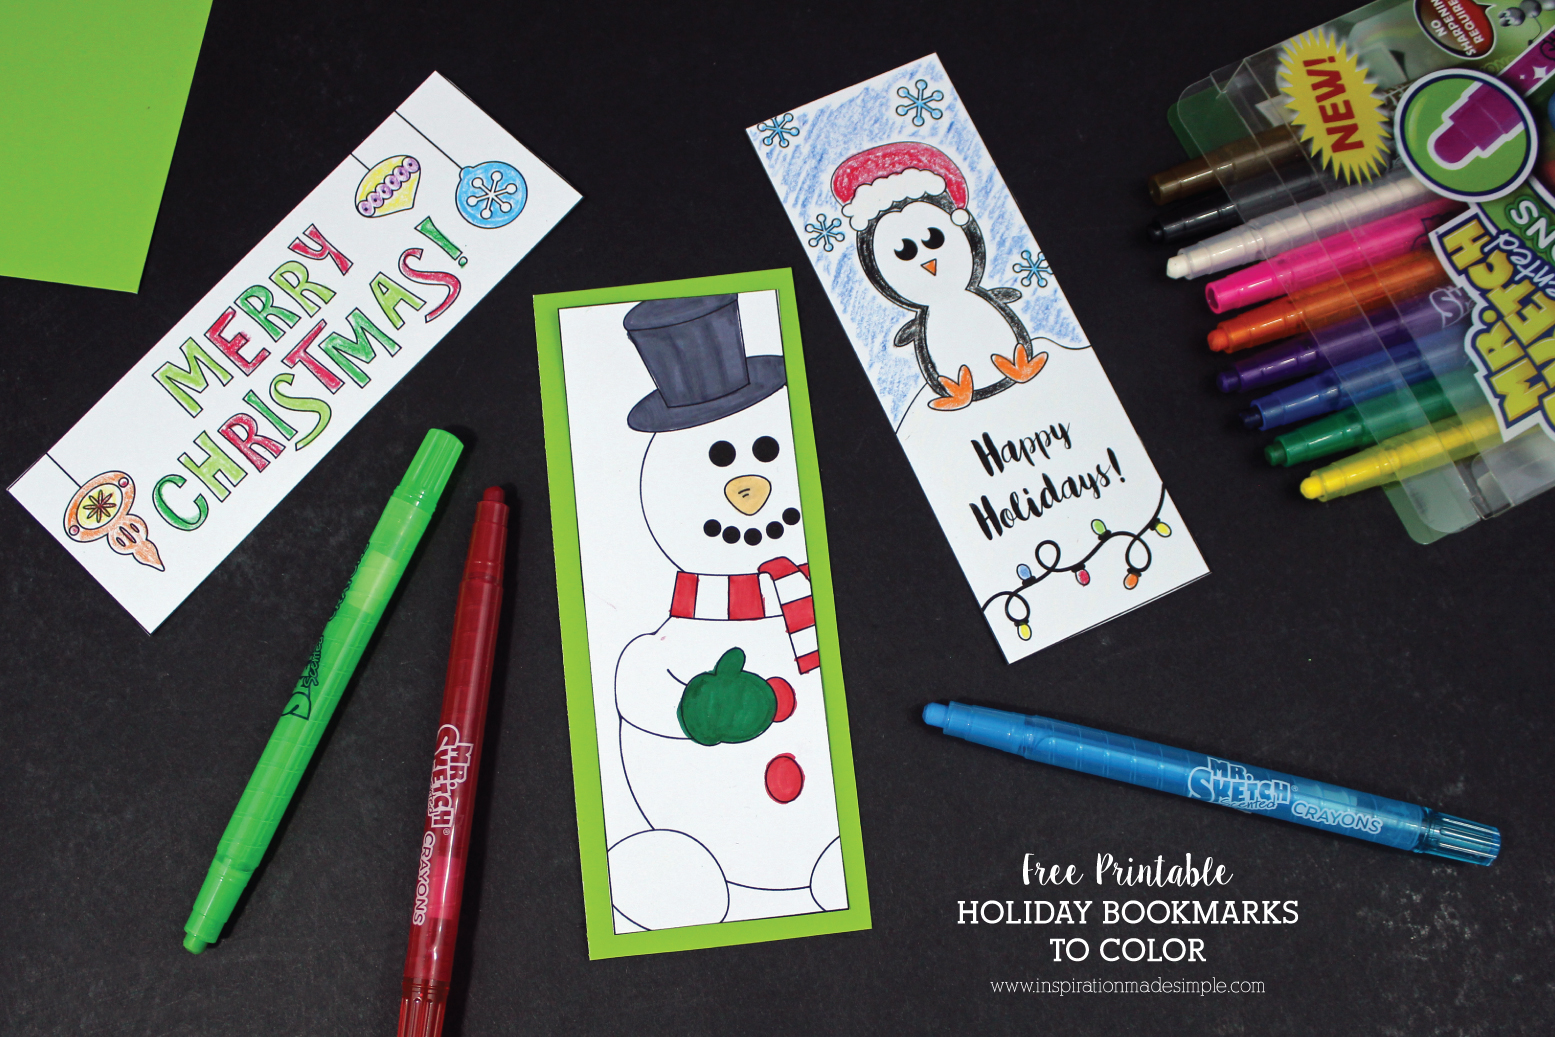 Free Printable Holiday Bookmarks to Color - make great gift tags too!